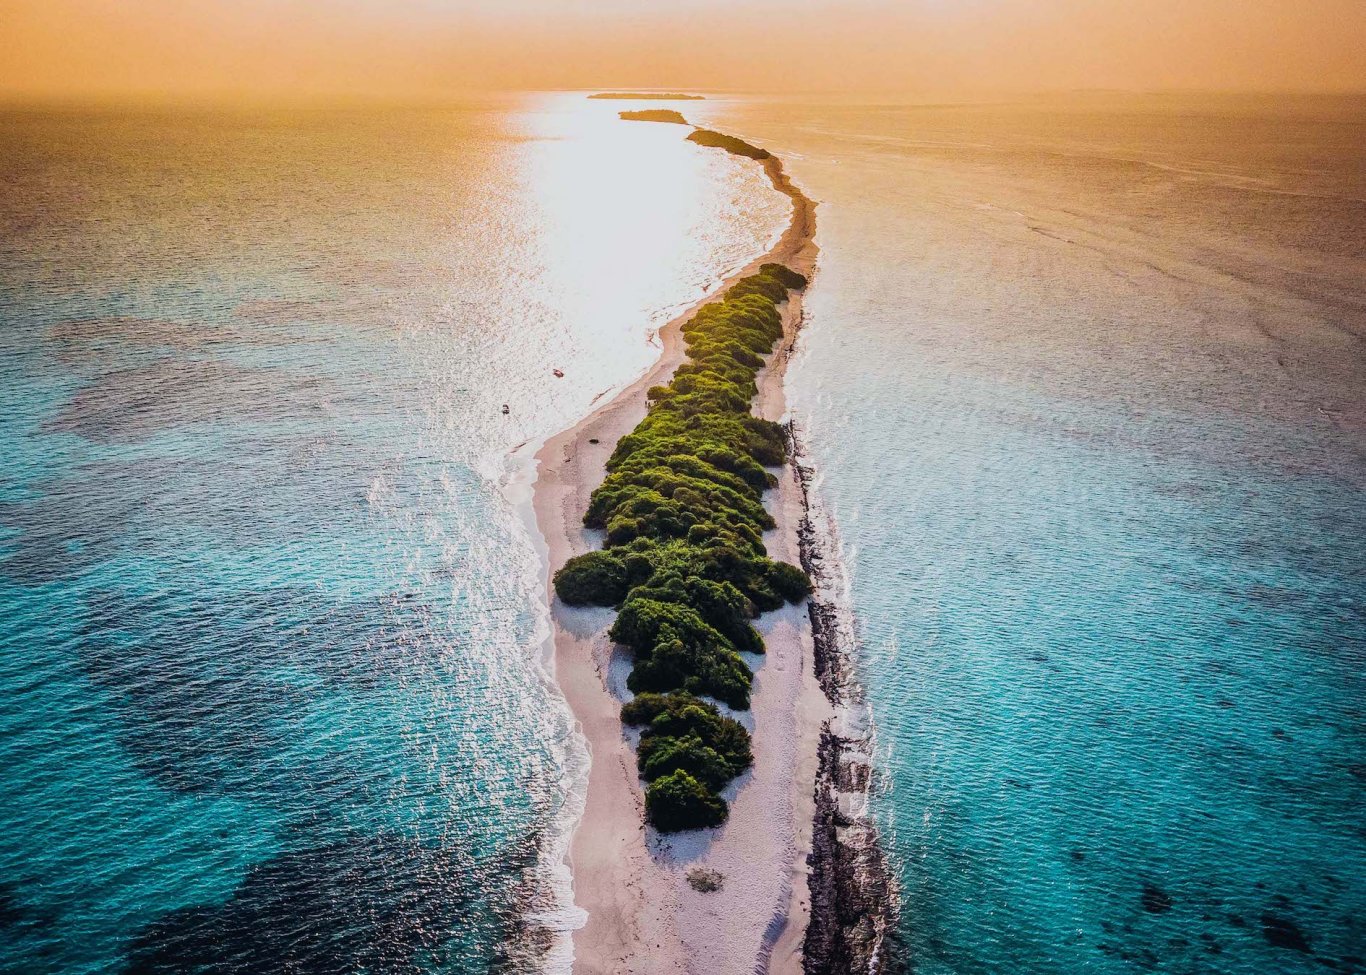 A long sandbank surrounded by bright blue water at sunset in the Maldives 